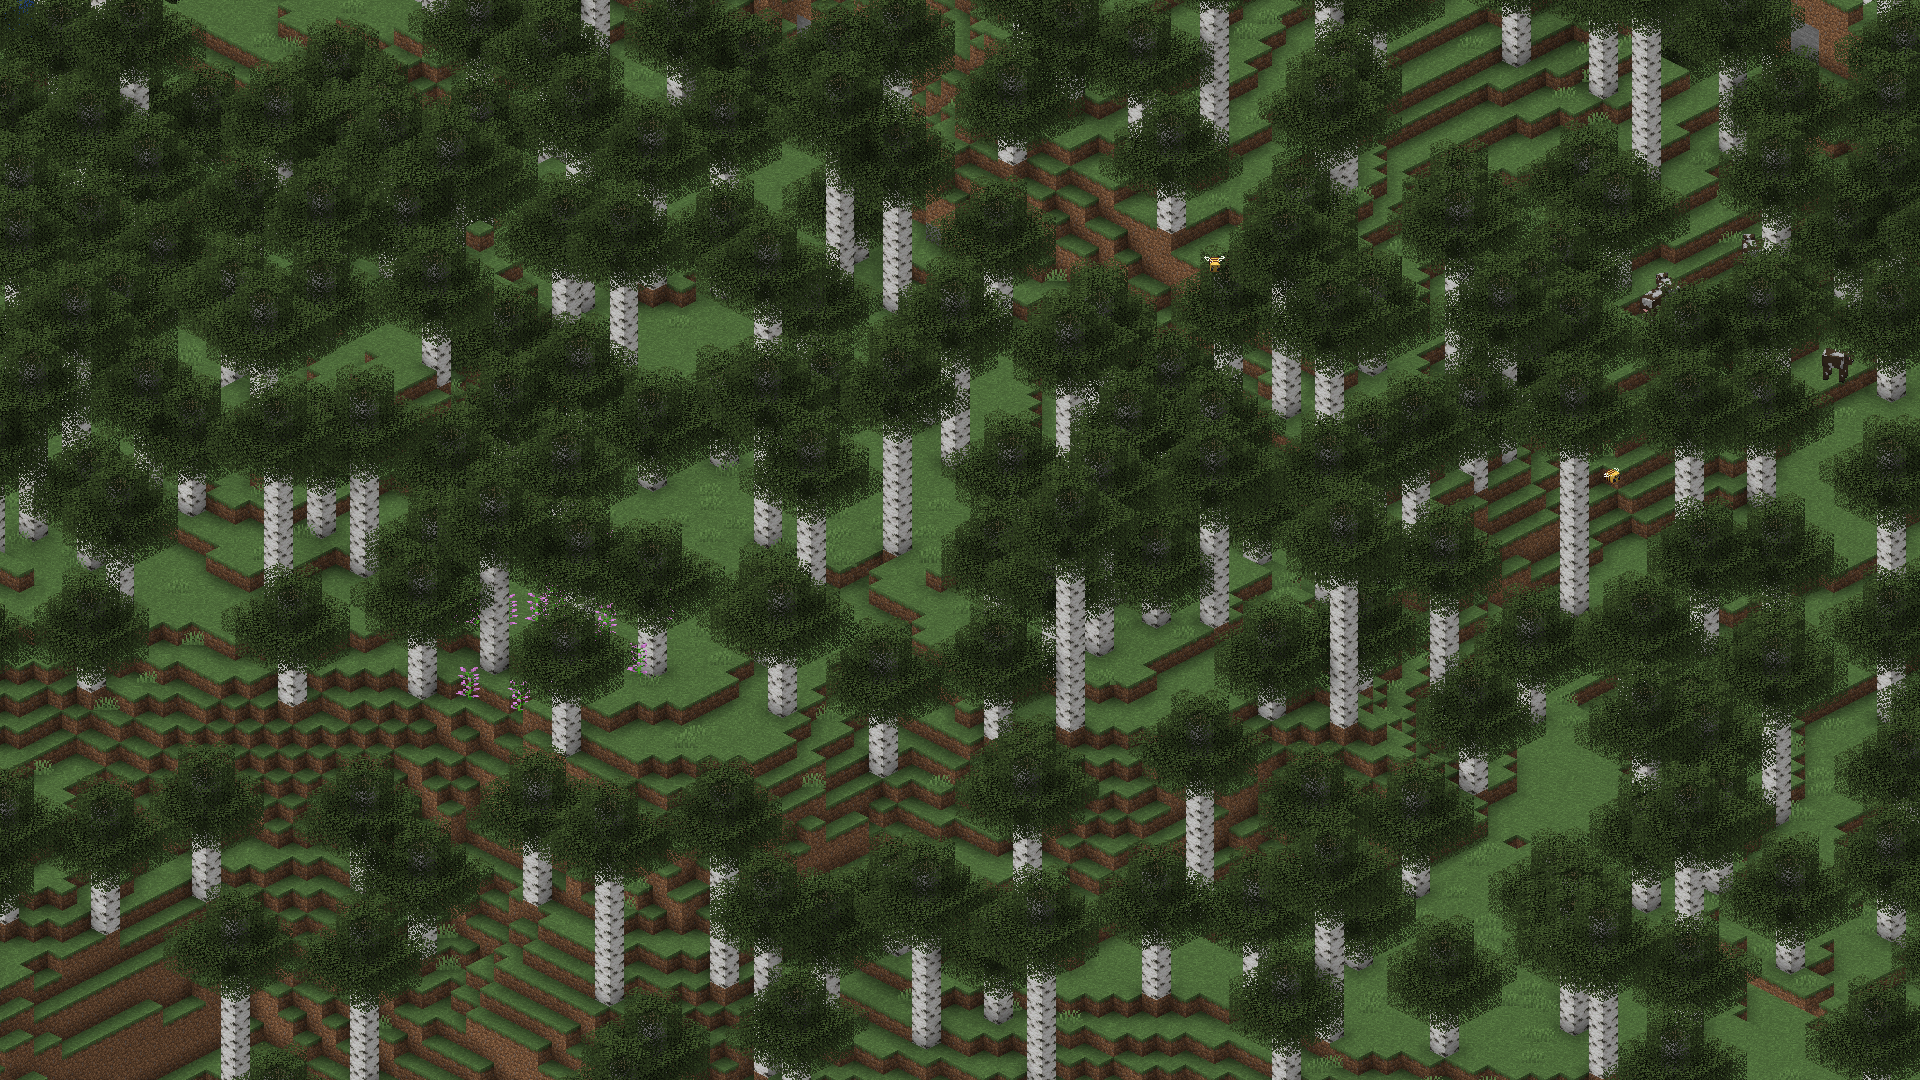 Mega Old Growth Pine and Spruce Taiga, Seed : jungle, Coords : 7500 109  -3200